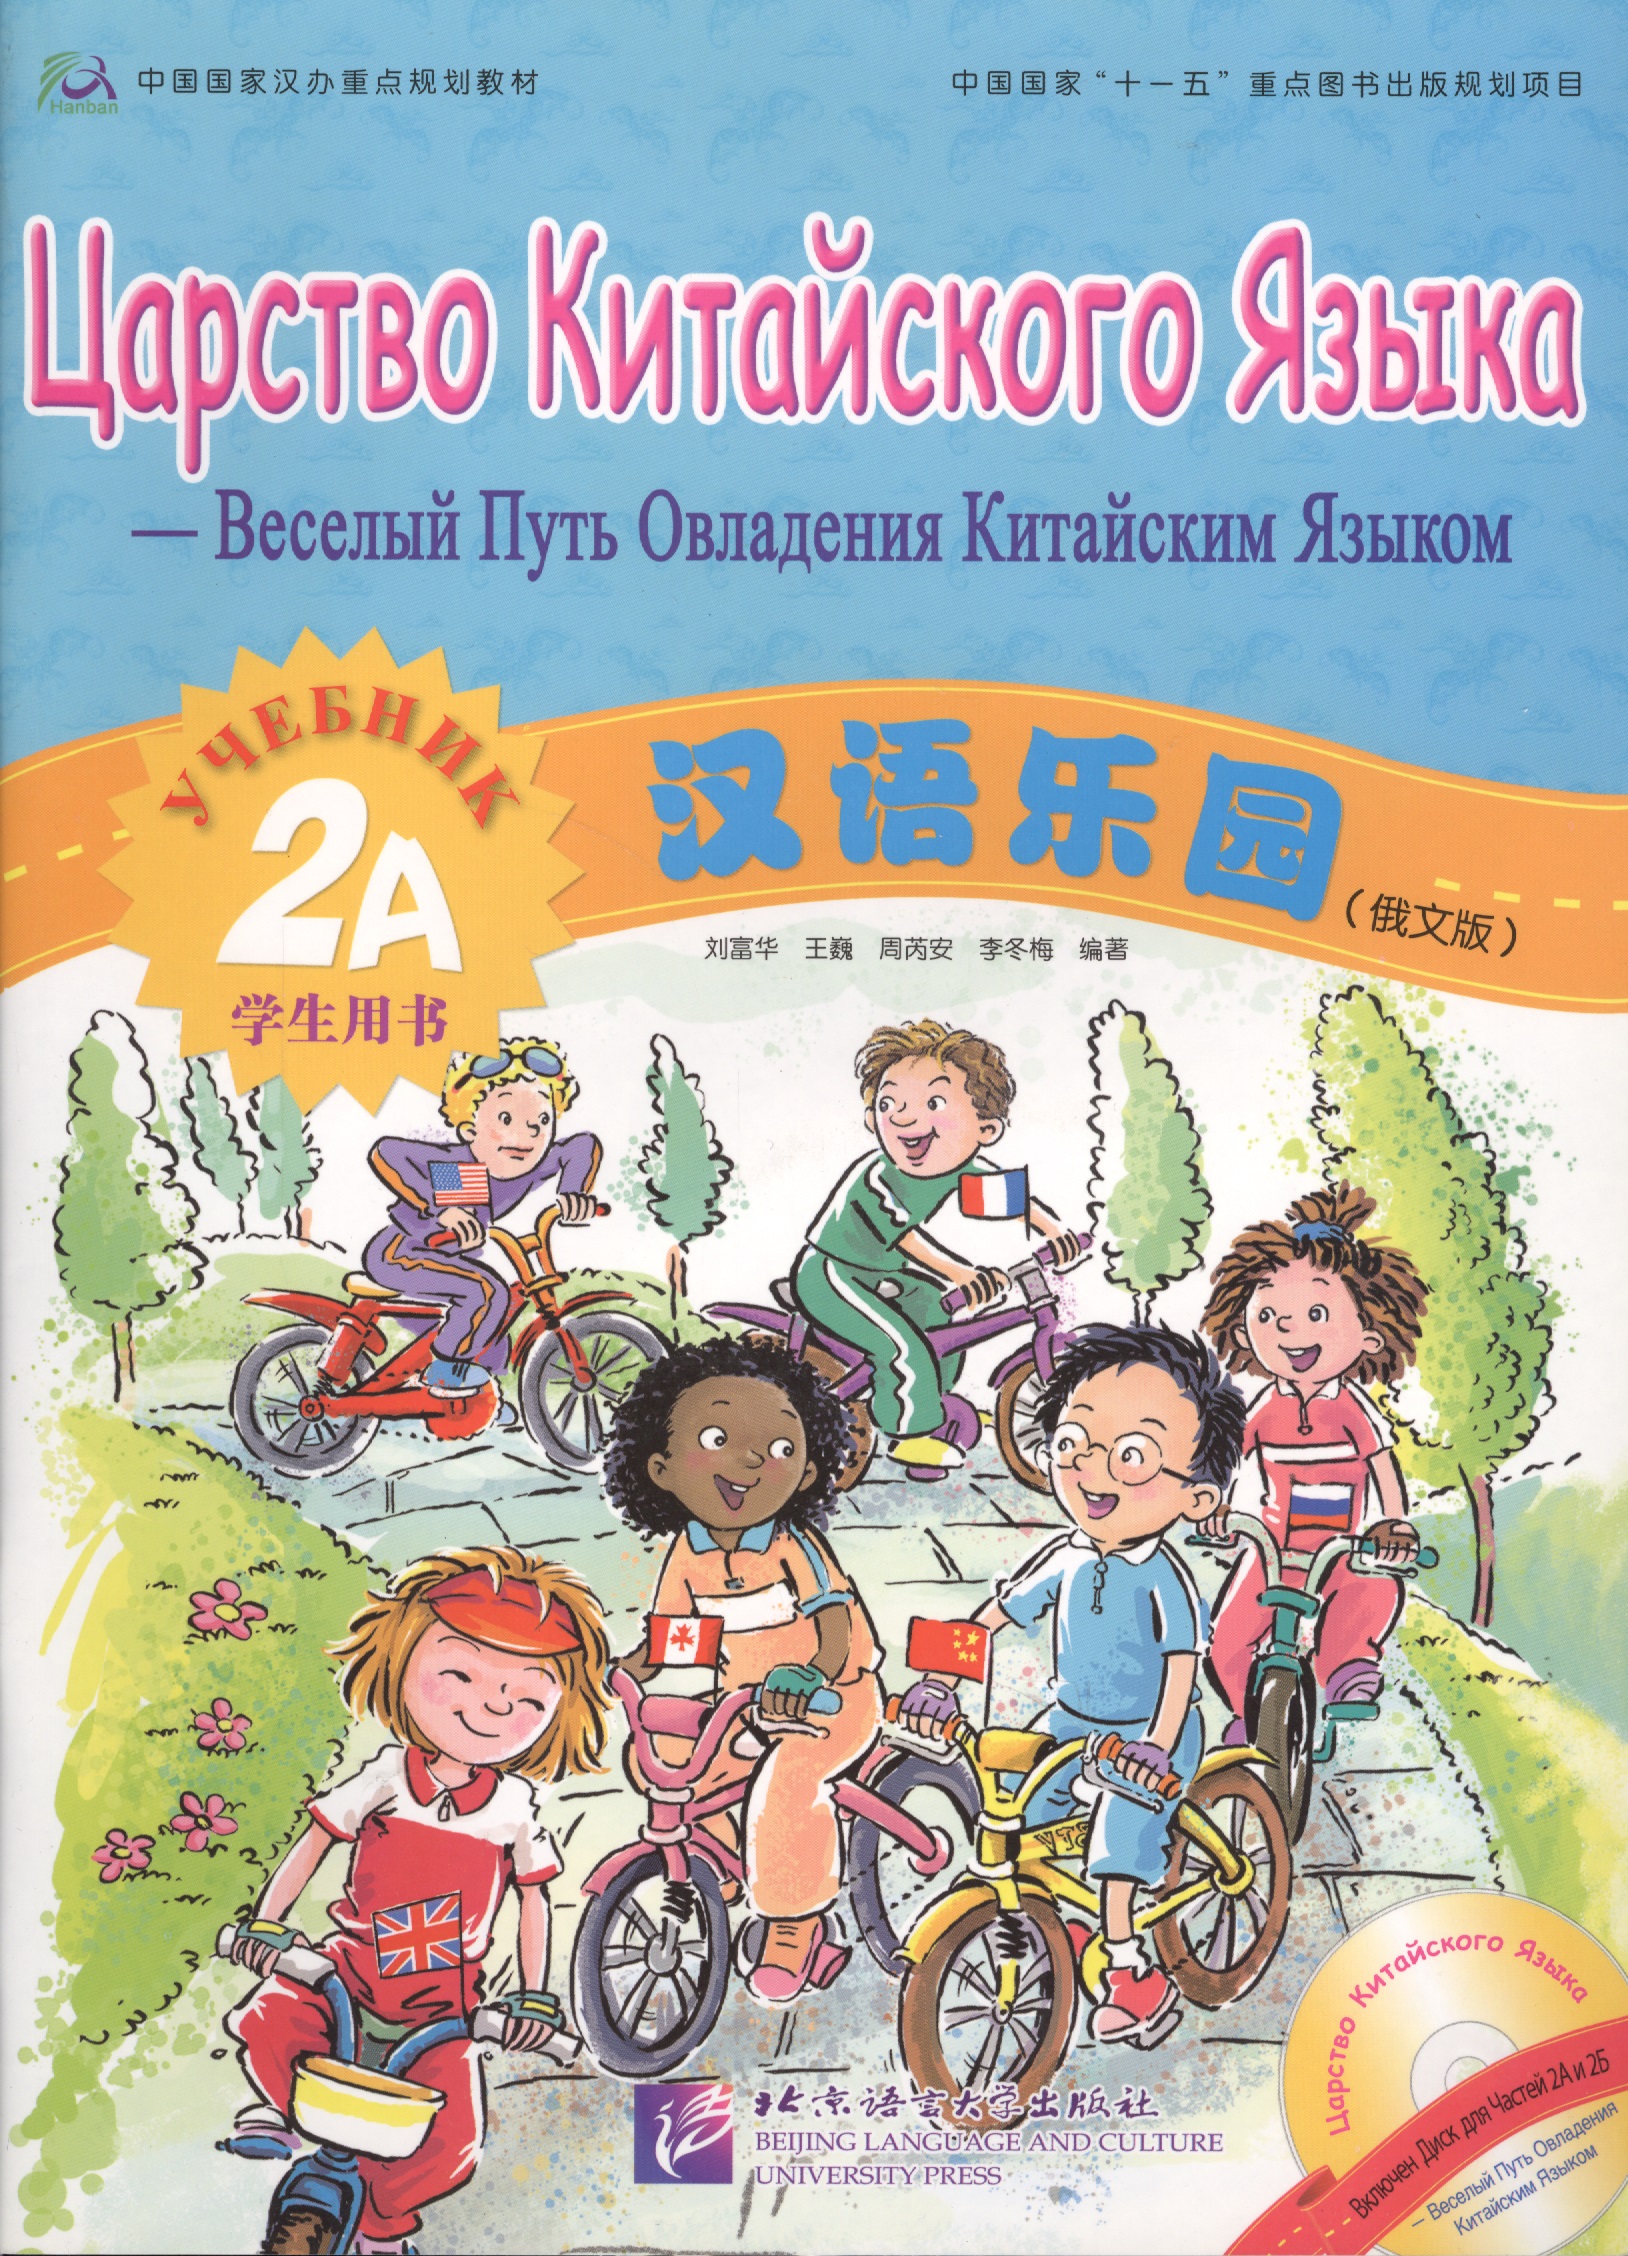 Fuhua L. Chinese Paradise (Russian edition) 2A / Царство китайского языка (русское издание) 2A - Students book with CD fuhua l chinese paradise russian edition 3b царство китайского языка русское издание 3b students book